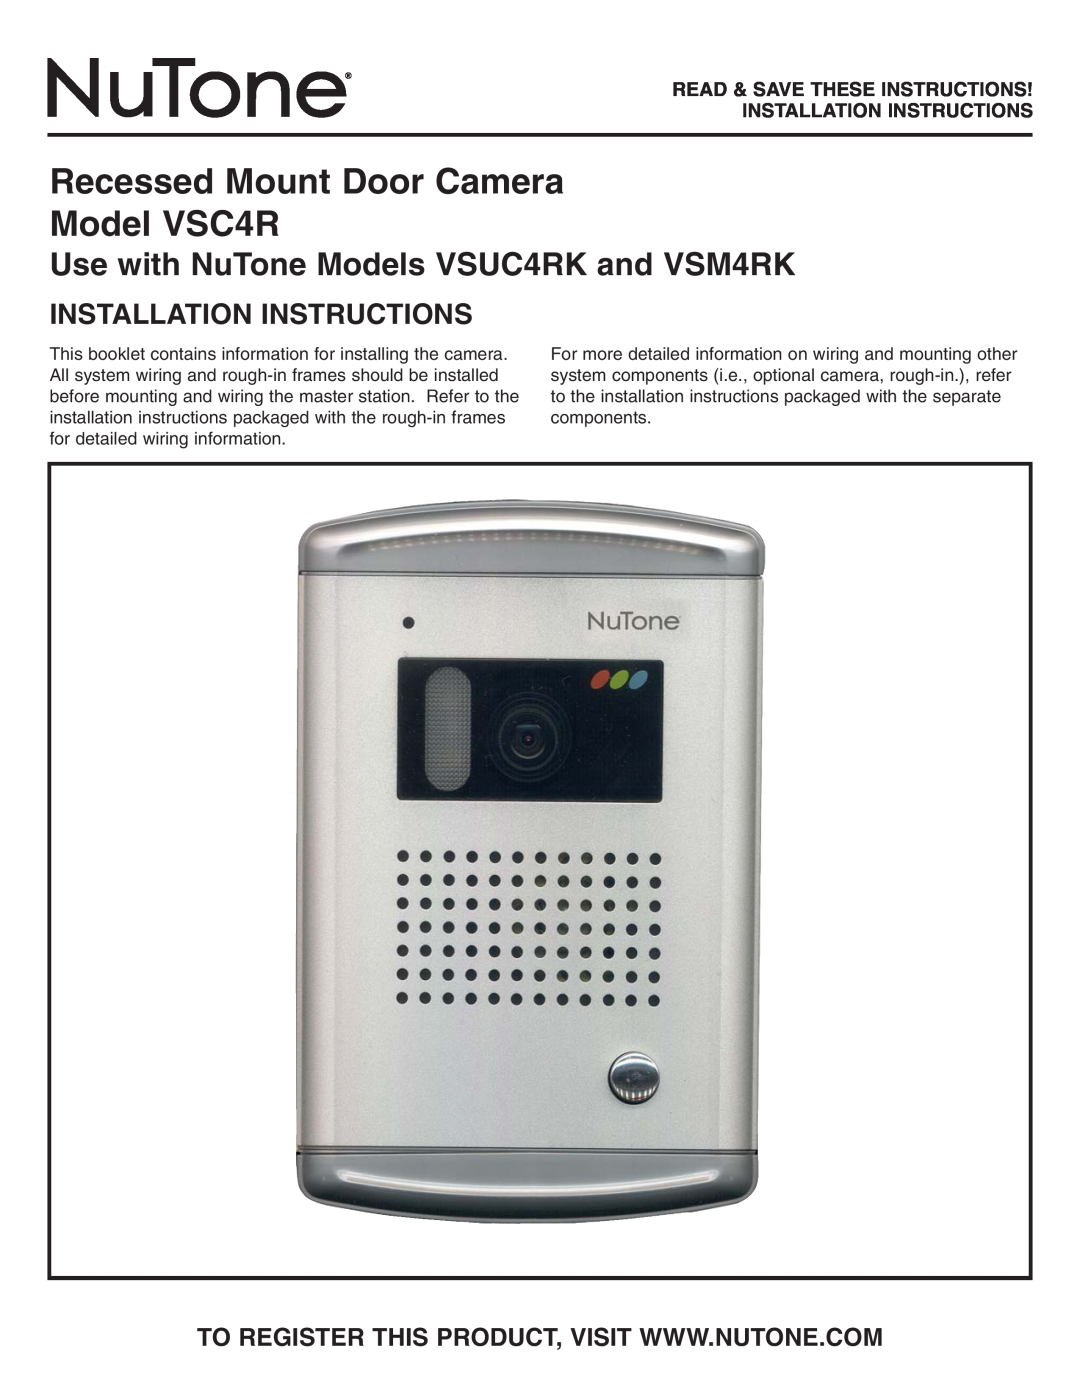 NuTone installation instructions Recessed Mount Door Camera Model VSC4R, Use with NuTone Models VSUC4RK and VSM4RK 